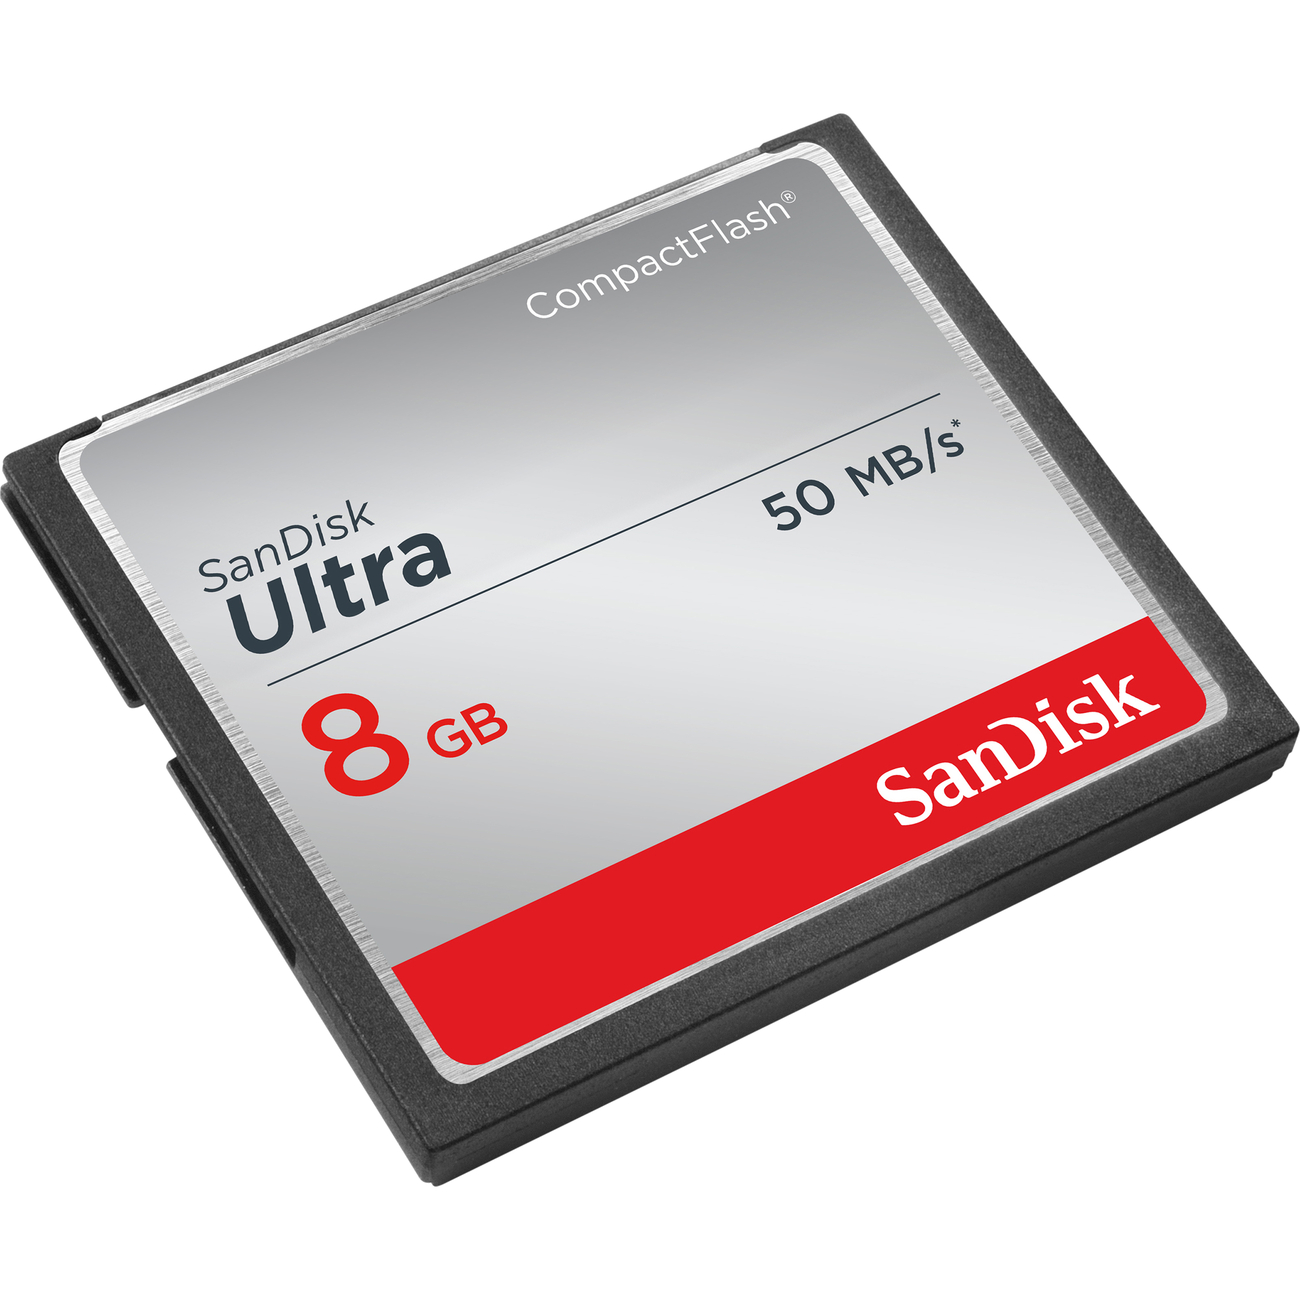 SanDisk SDCFHS-008G-A46 8GB Ultra CompactFlash Card